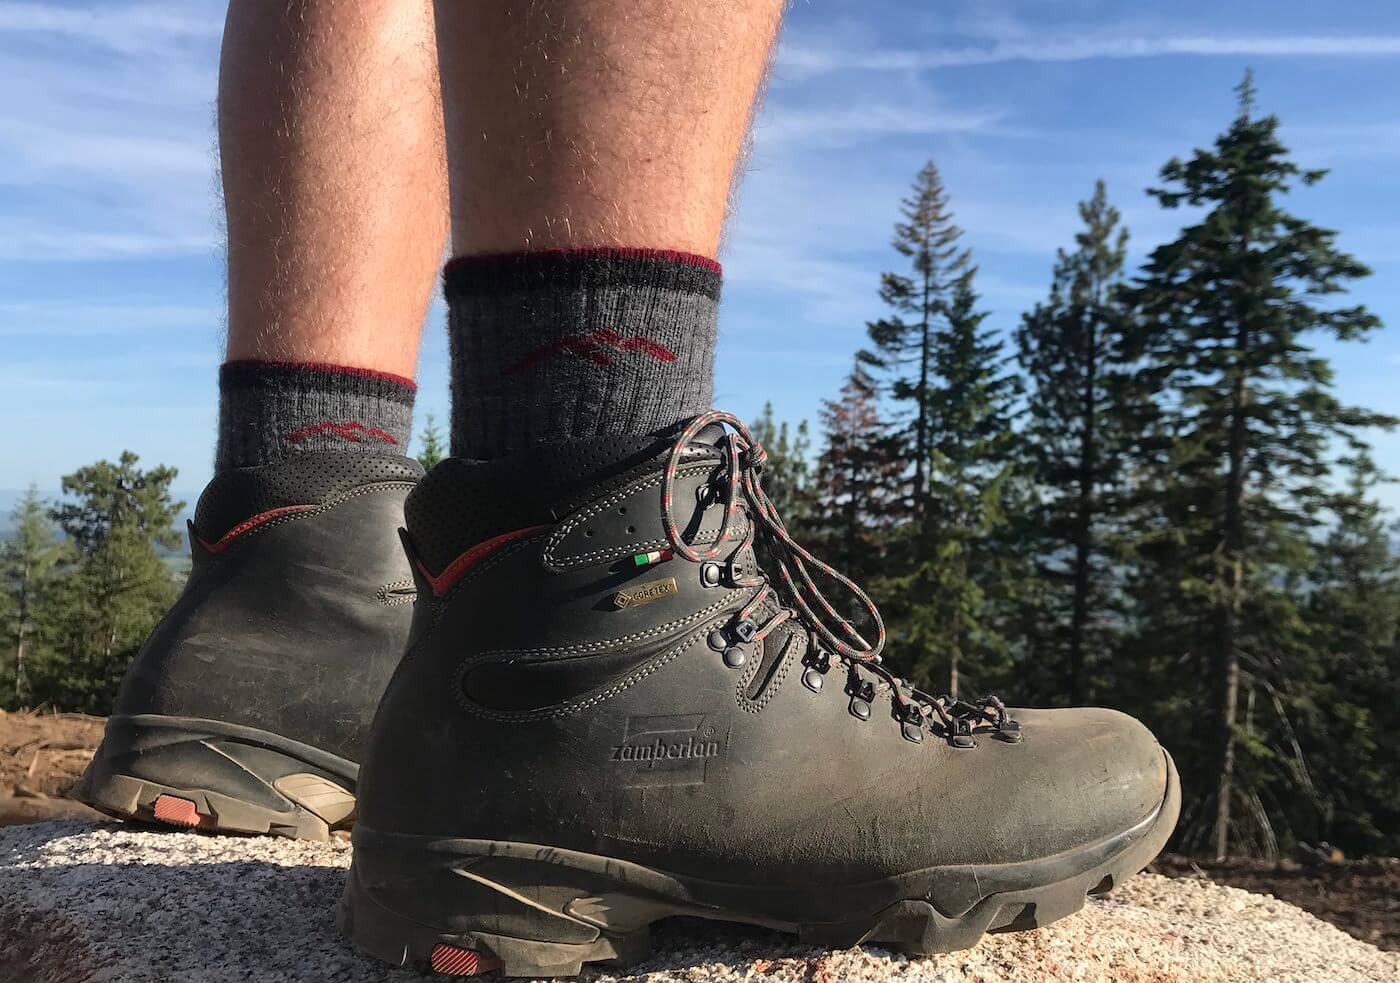 This Darn Tough sock review photo shows the Darn Tough Hiker Boot Sock Full Cushion Sock being worn by a hiker.